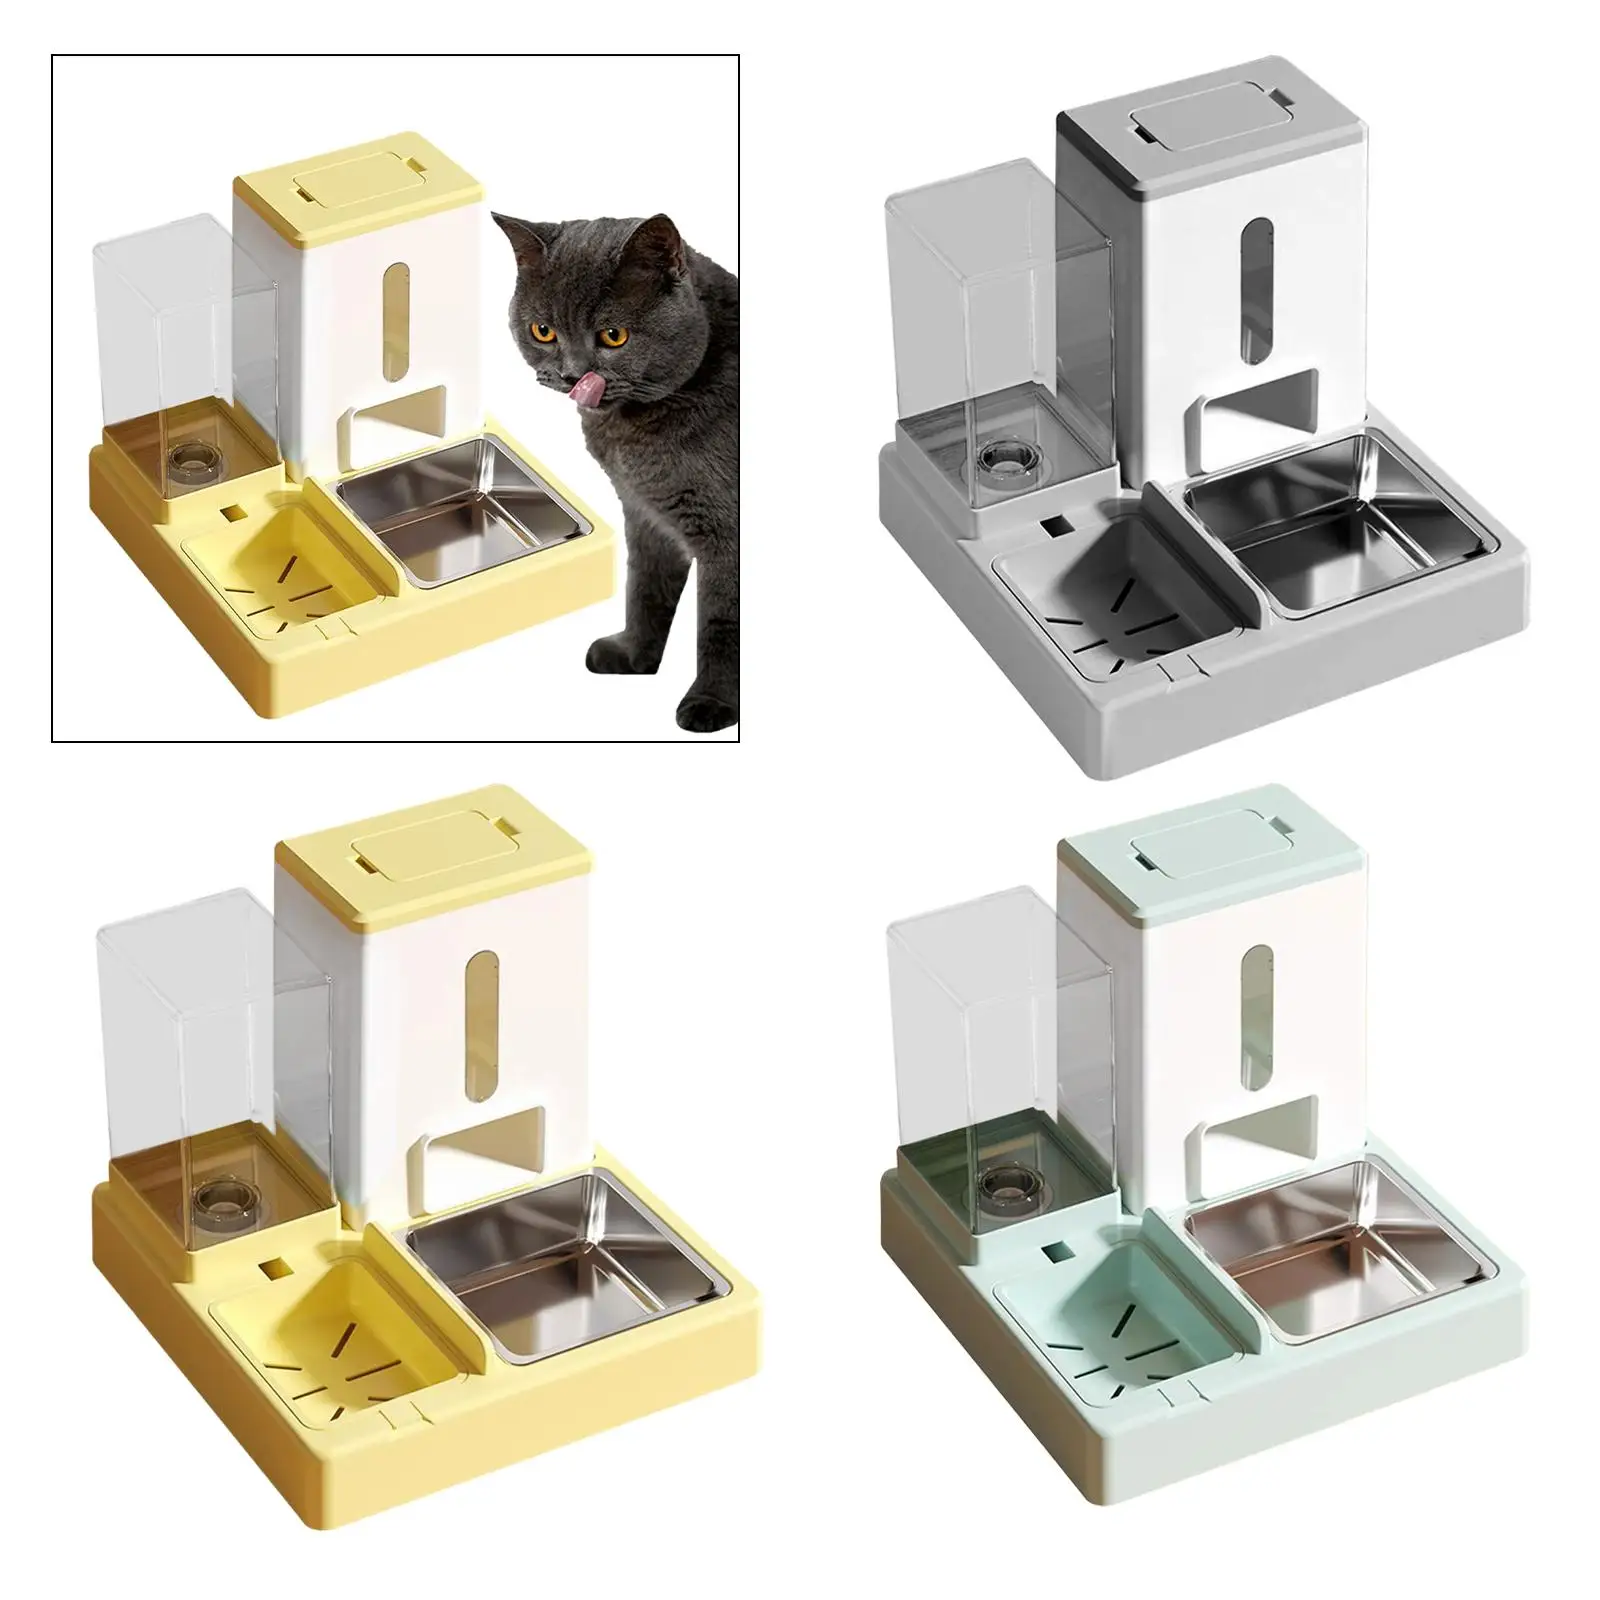 2 in 1 Cat Bowl and Water Feeder Detachable Stainless Steel Bowl Automatic Cat Drinker Bowl for Cats Small Animals Puppy Dogs